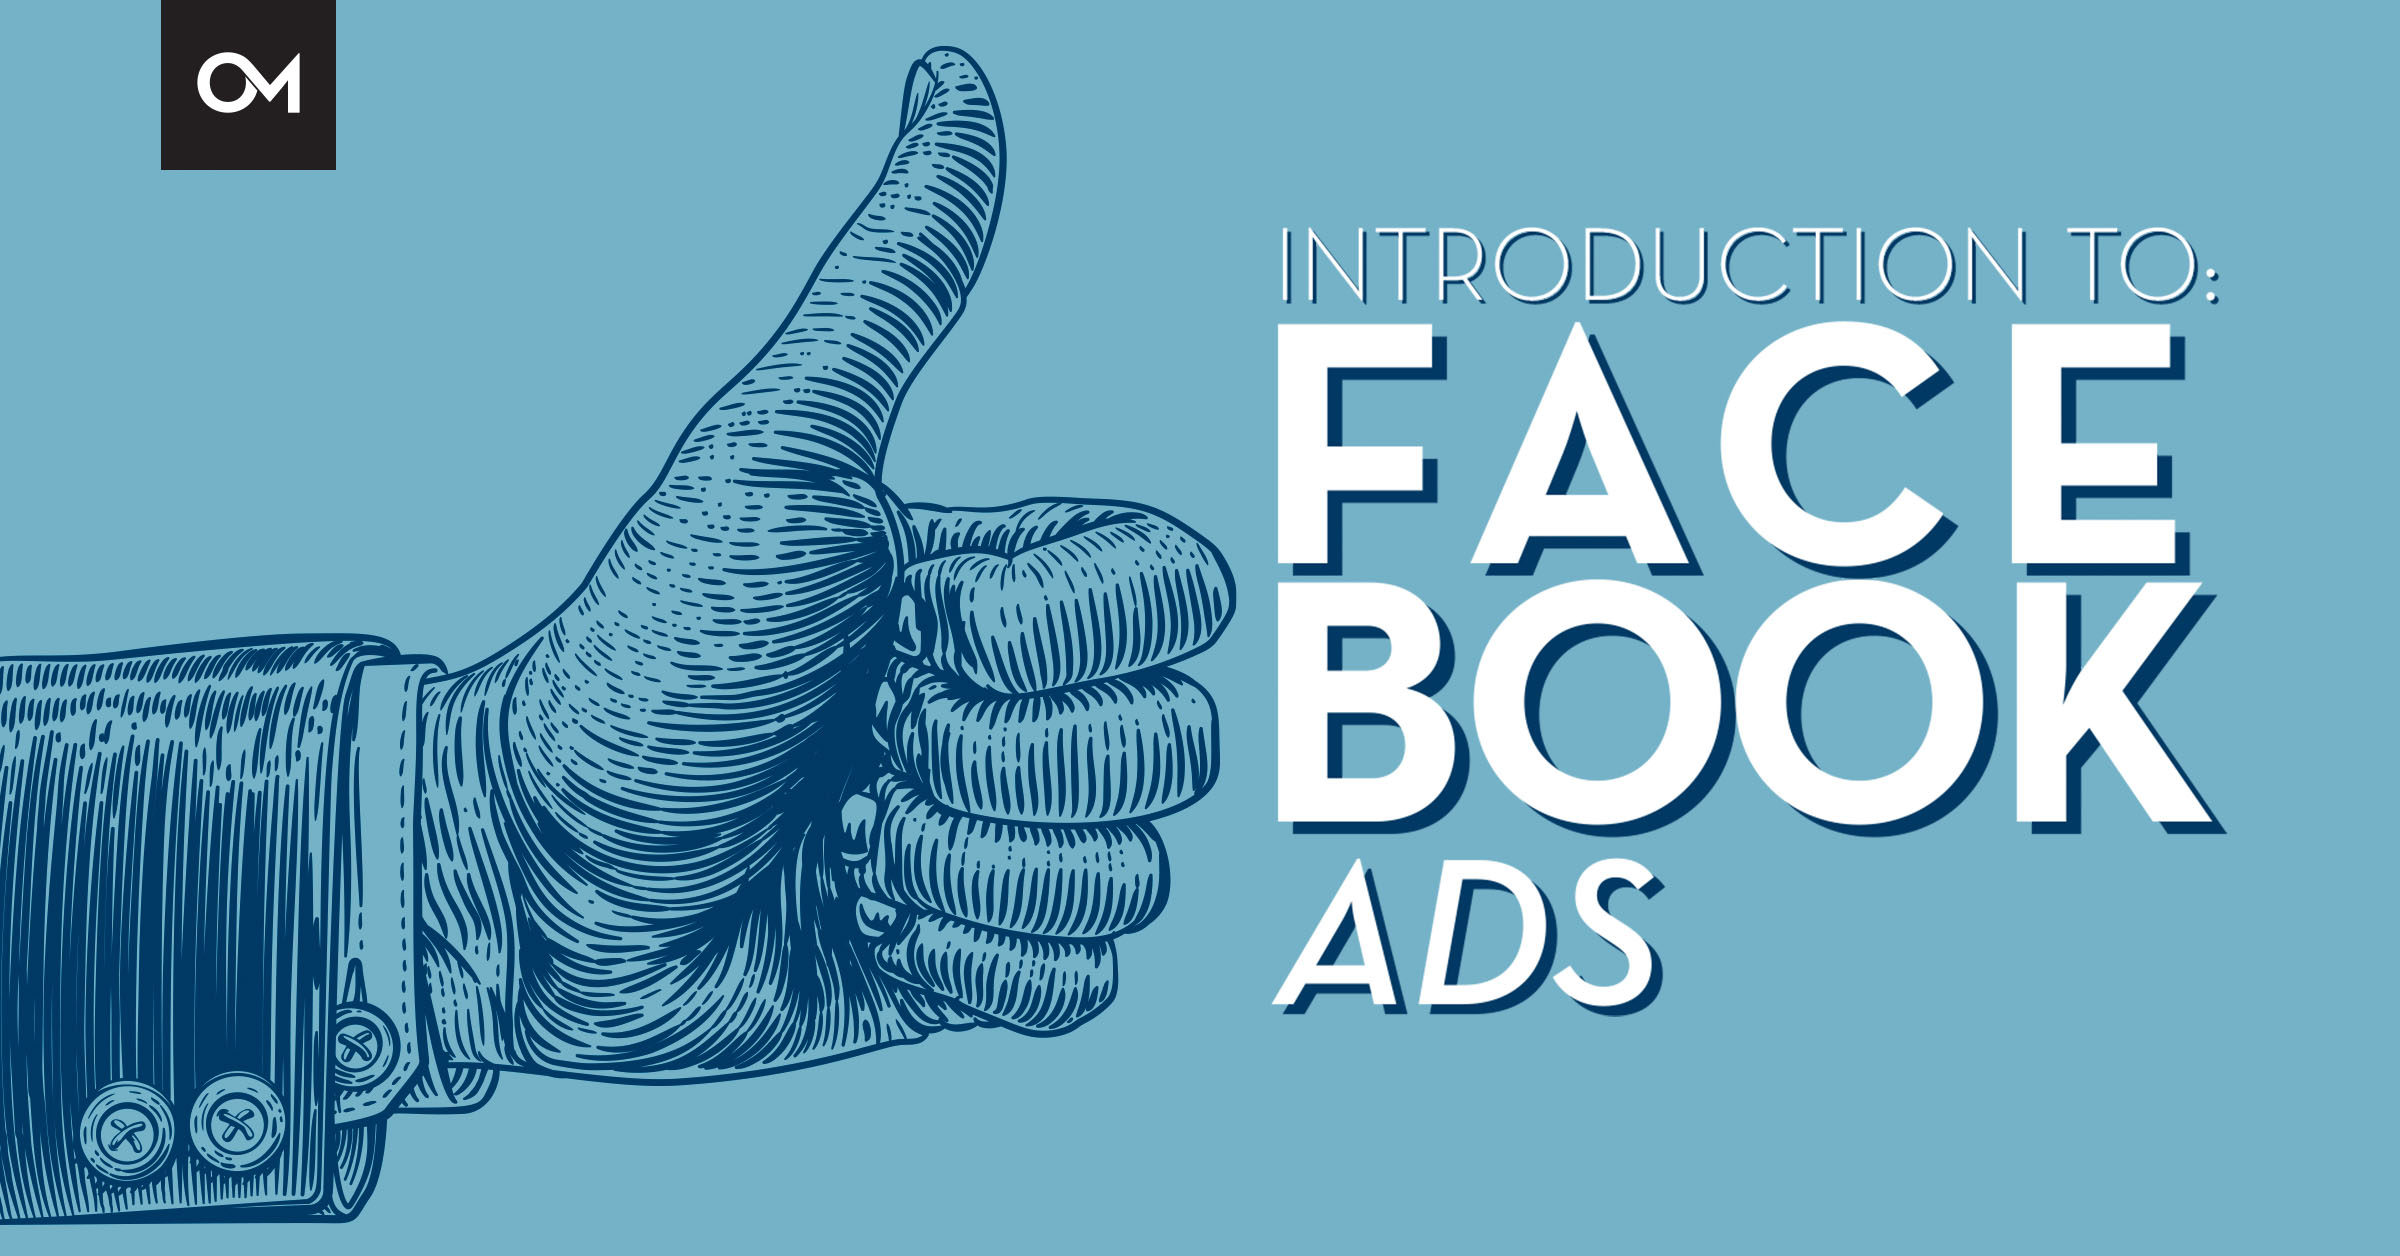 Introduction to Facebook Ads